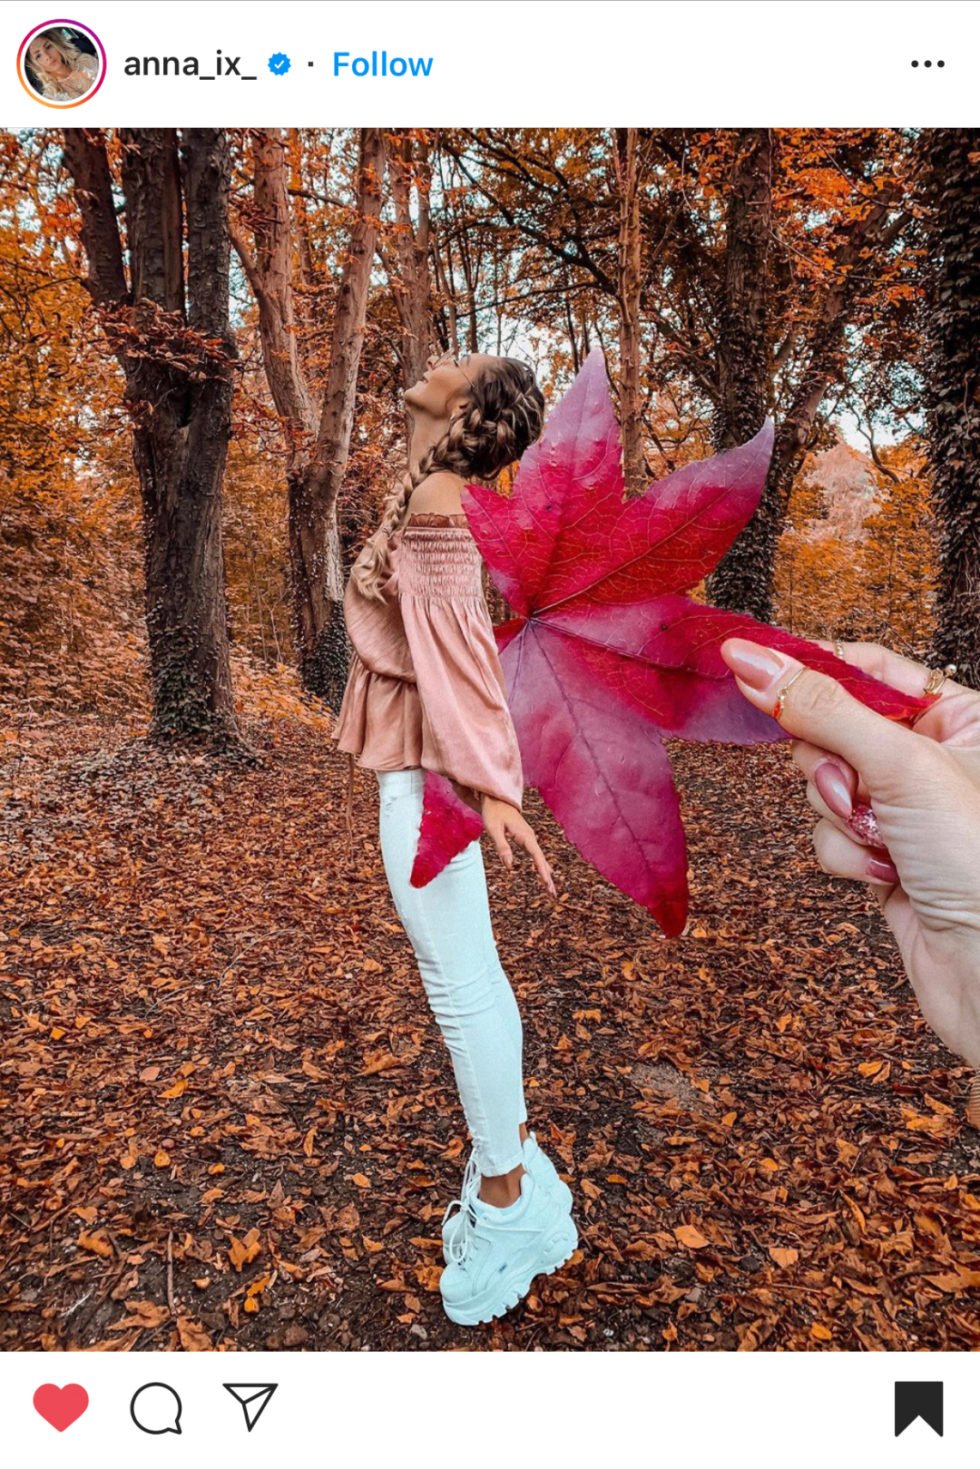 Best Instagram Fall Photo Ideas Inspiration Filters 1604